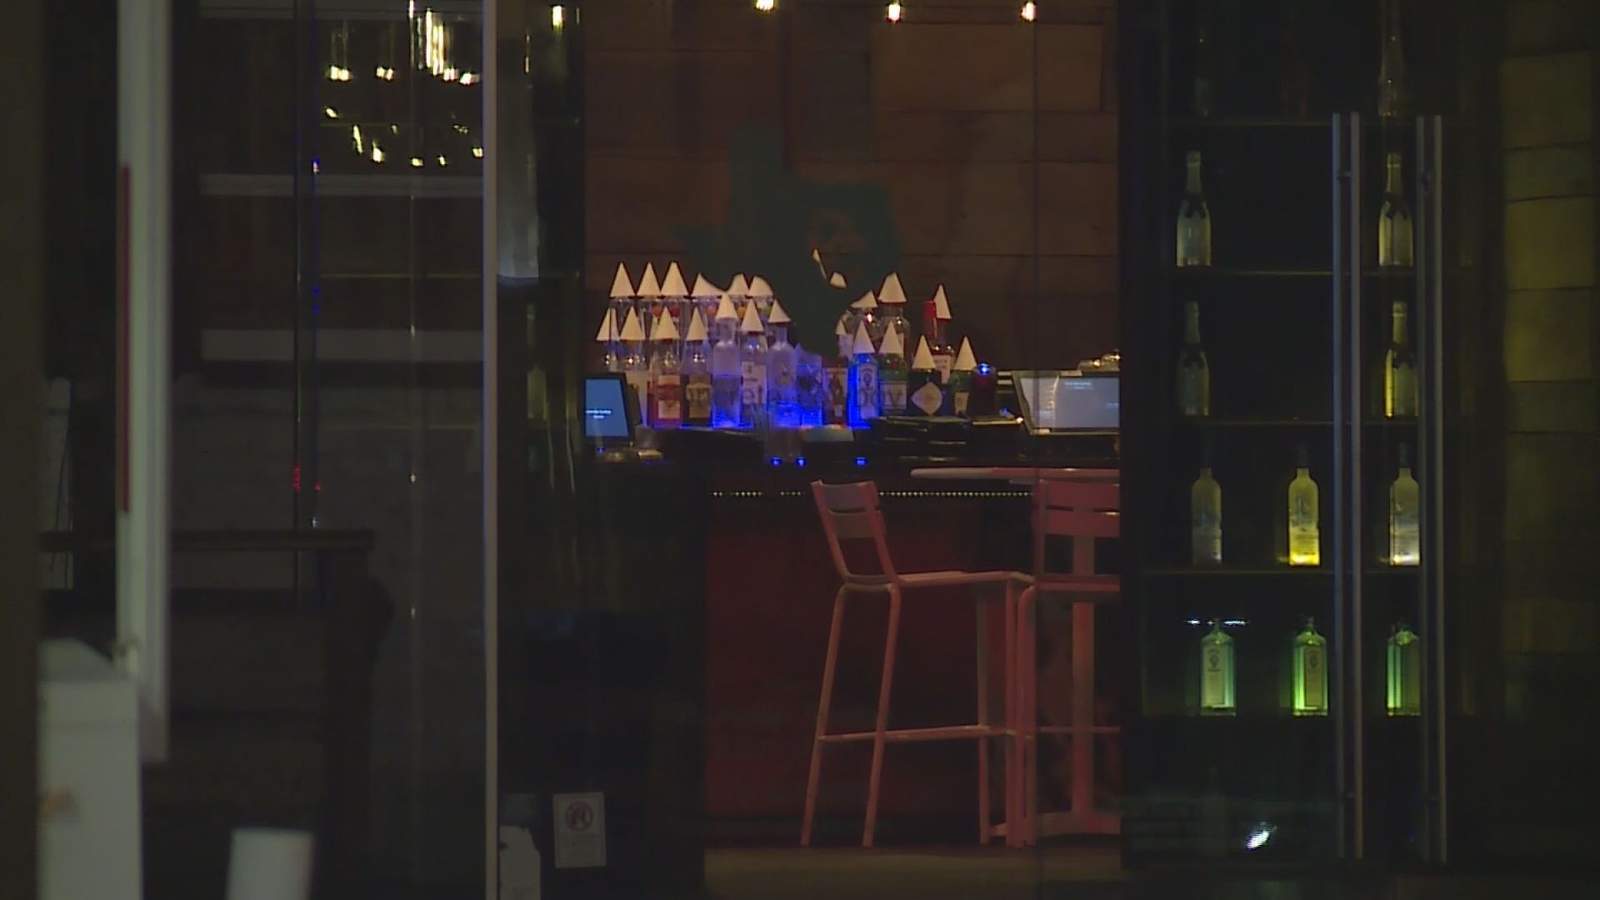 Local leaders, doctors concerned about ‘mask off’ party planned at Washington Avenue bar